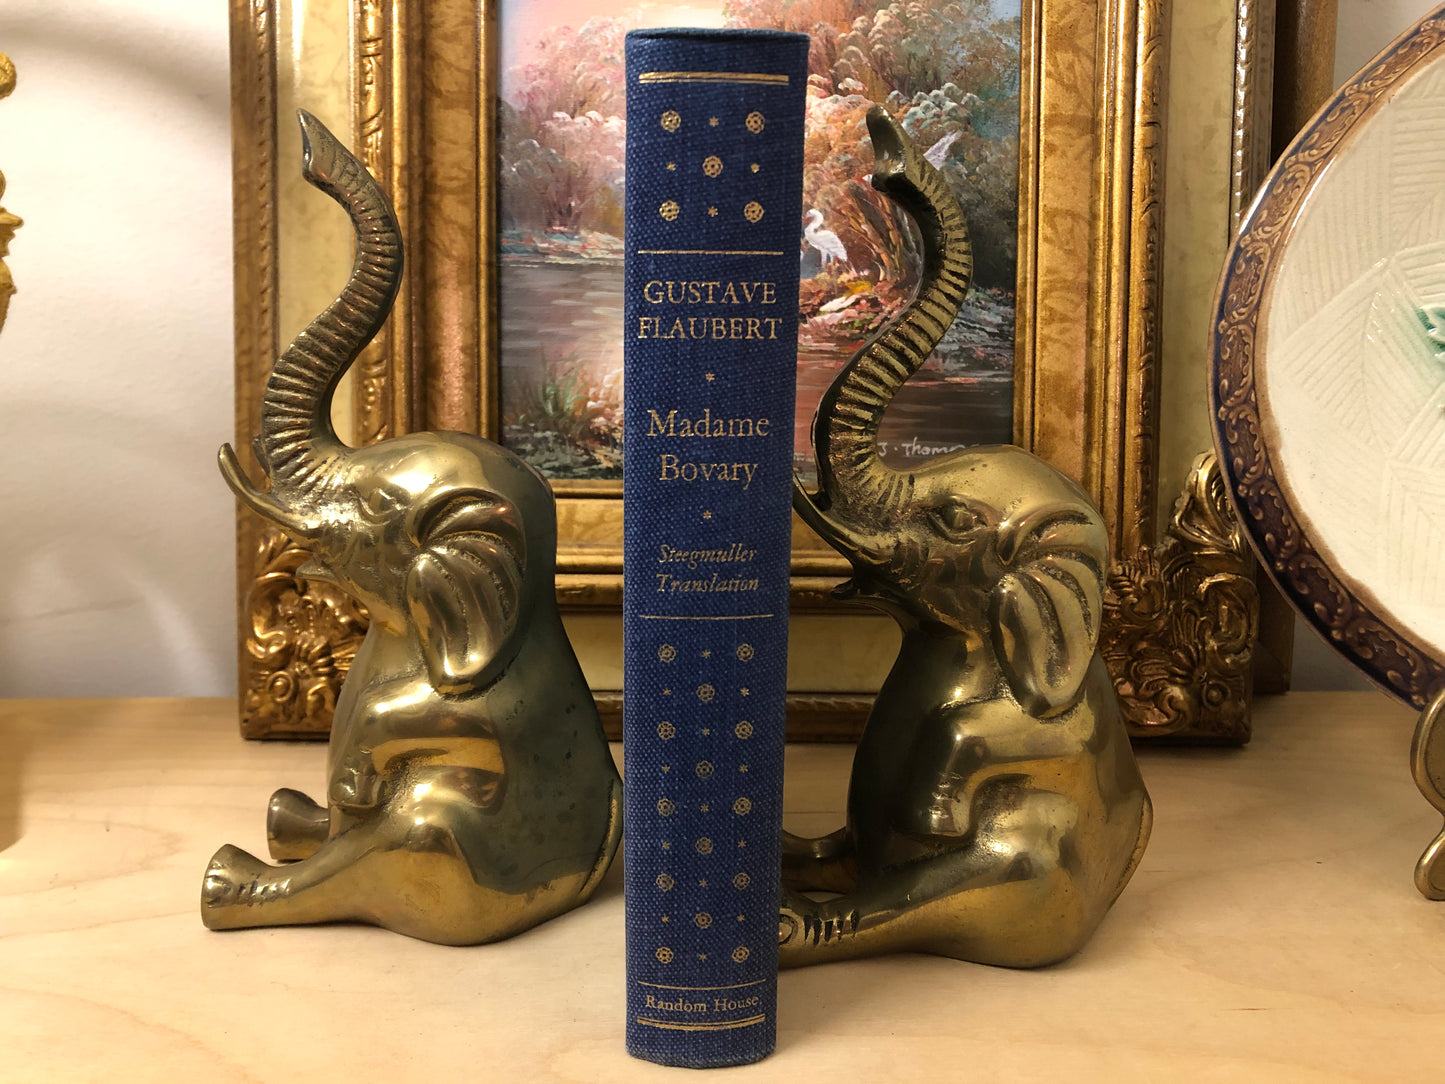 Lovely Solid Brass Elephant  Bookends Pair (2)